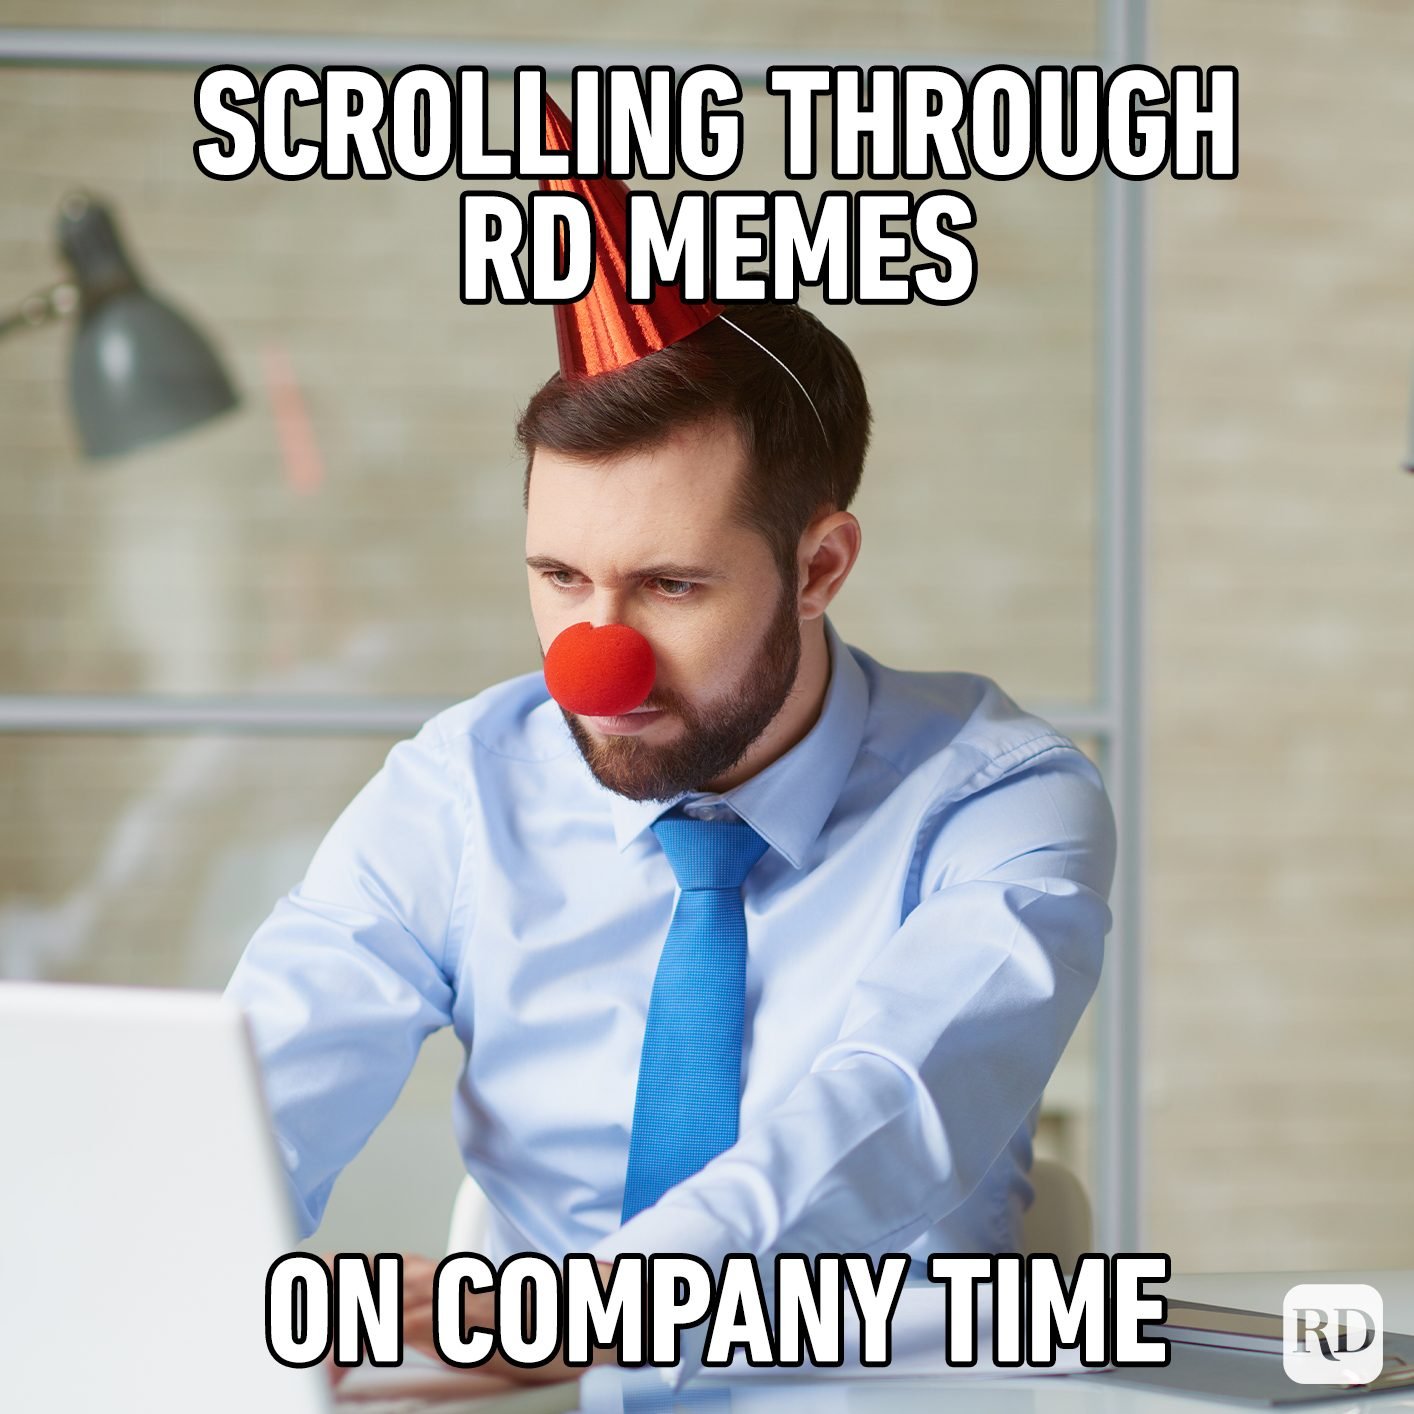 20 Funniest Back-to-Work Memes That Are All Too Relatable | Reader's Digest